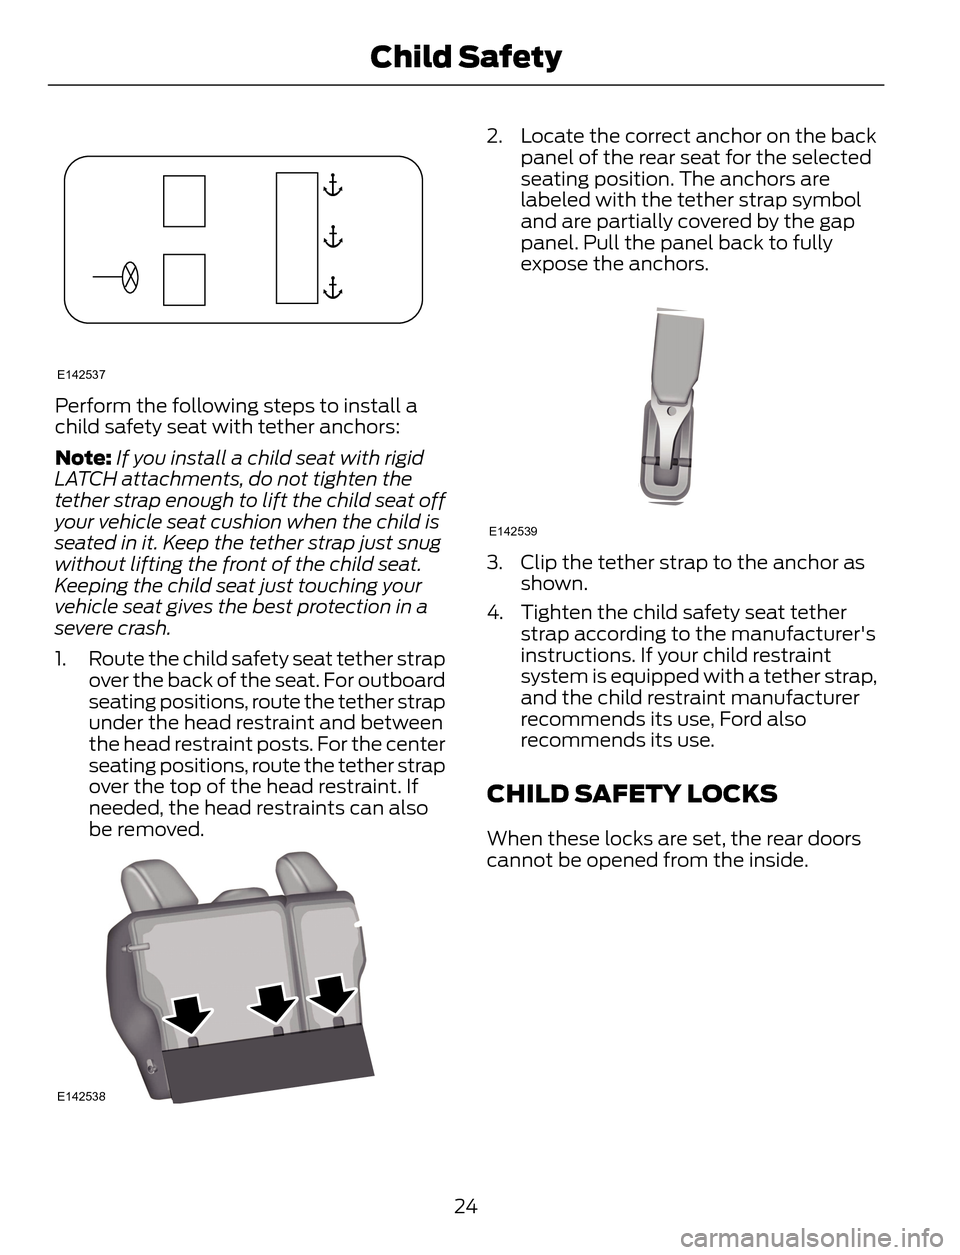 FORD ESCAPE 2014 3.G Owners Manual E142537
Perform the following steps to install a
child safety seat with tether anchors:
Note:If you install a child seat with rigid
LATCH attachments, do not tighten the
tether strap enough to lift th